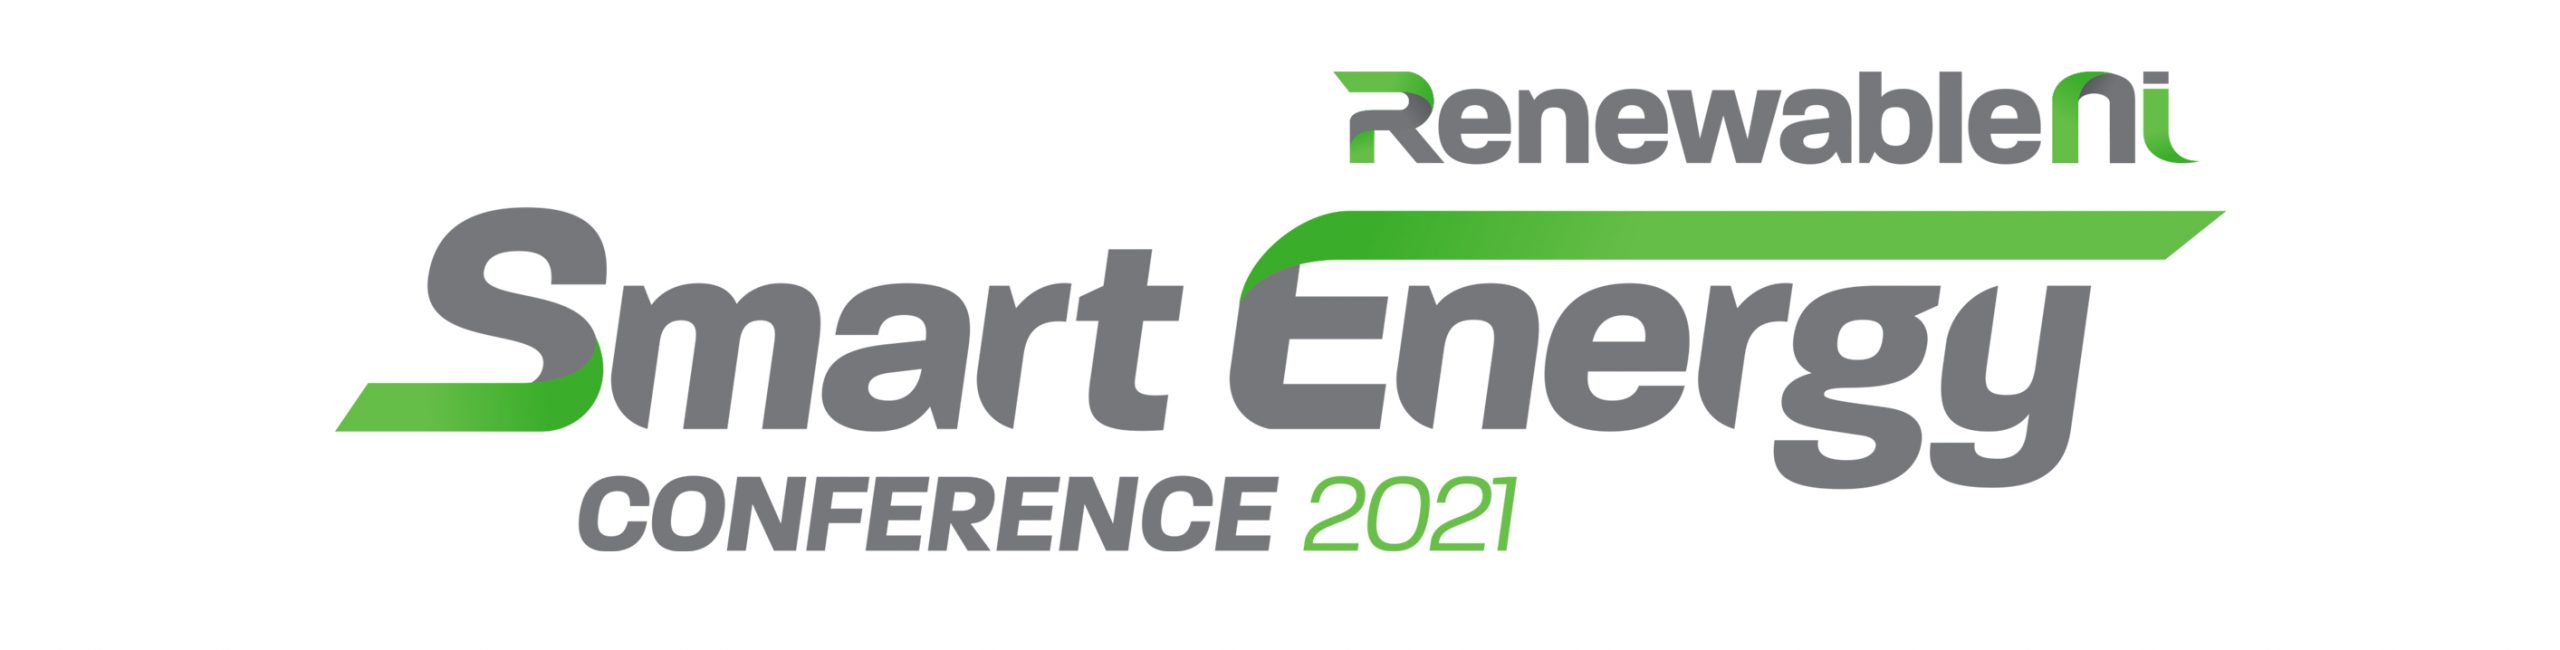 Smart Energy Conference 2021